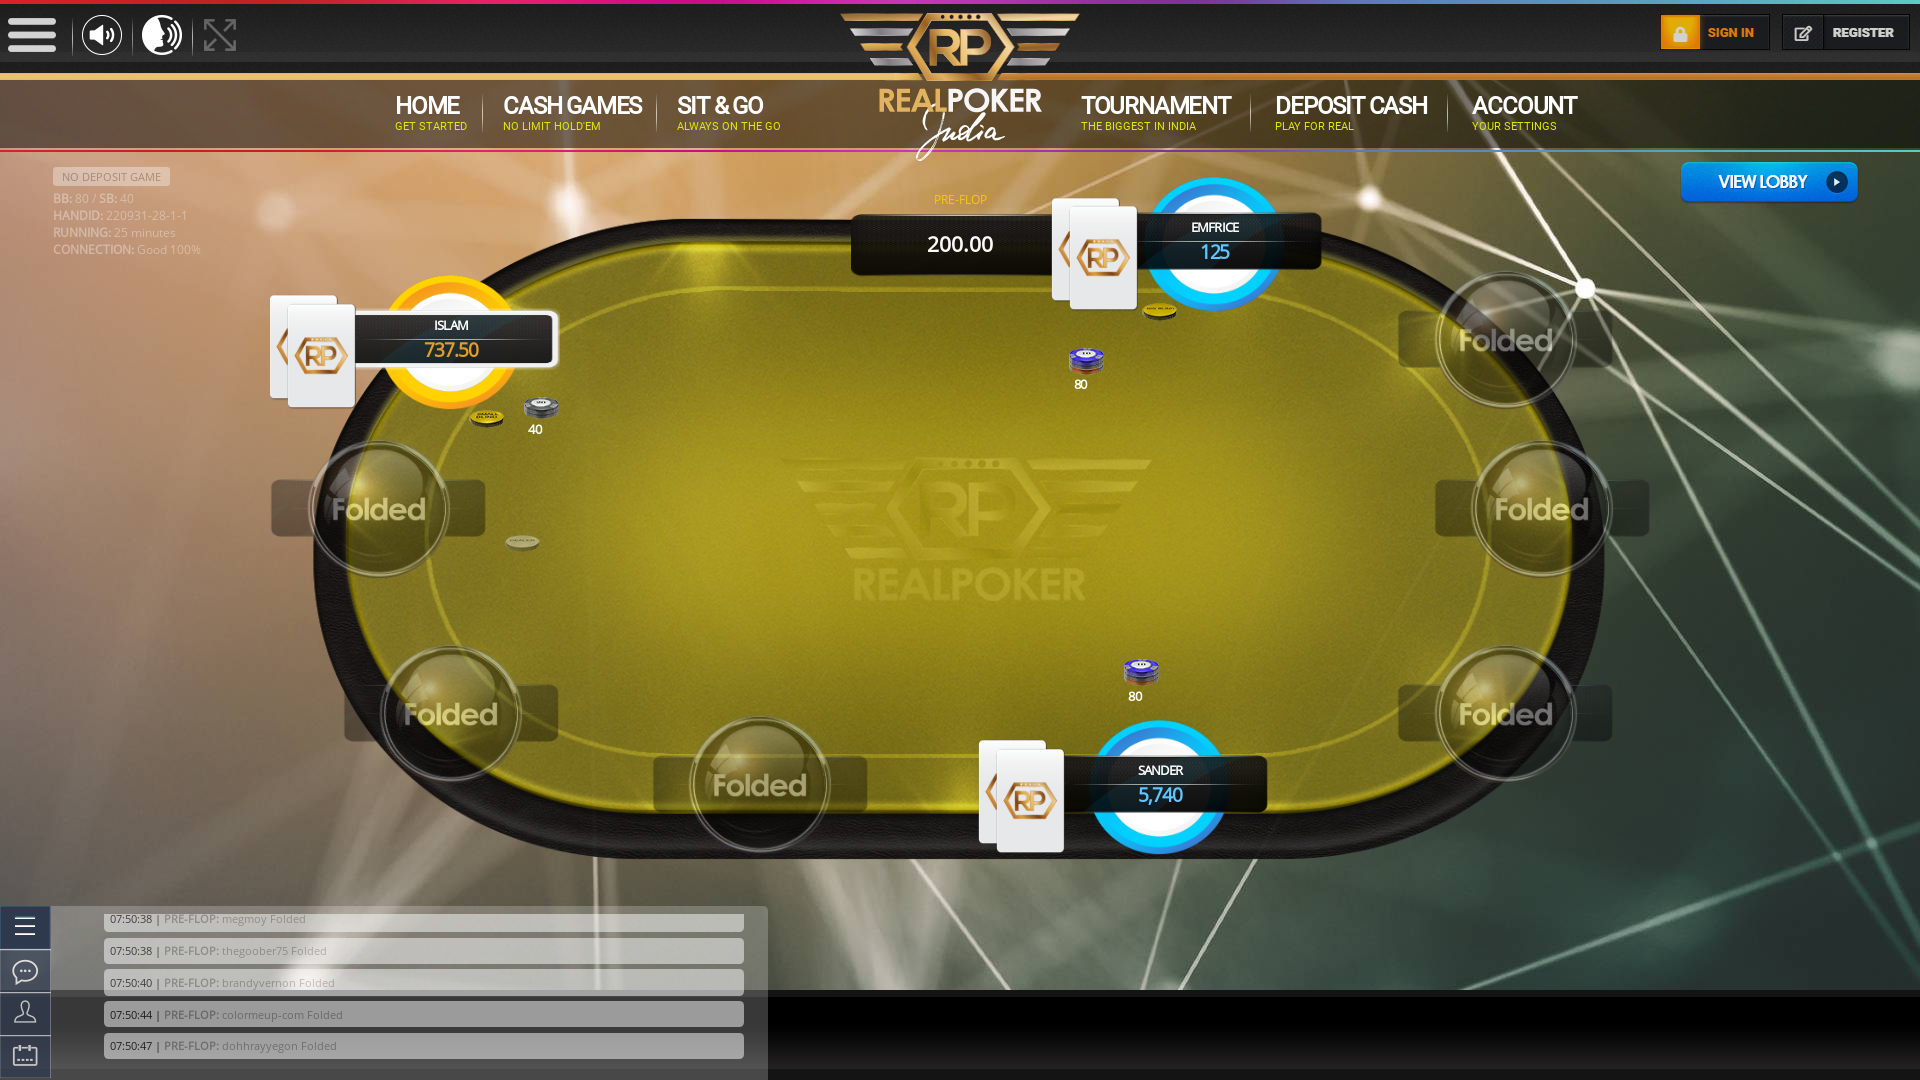 Real Indian poker on a 10 player table in the 25th minute of the game